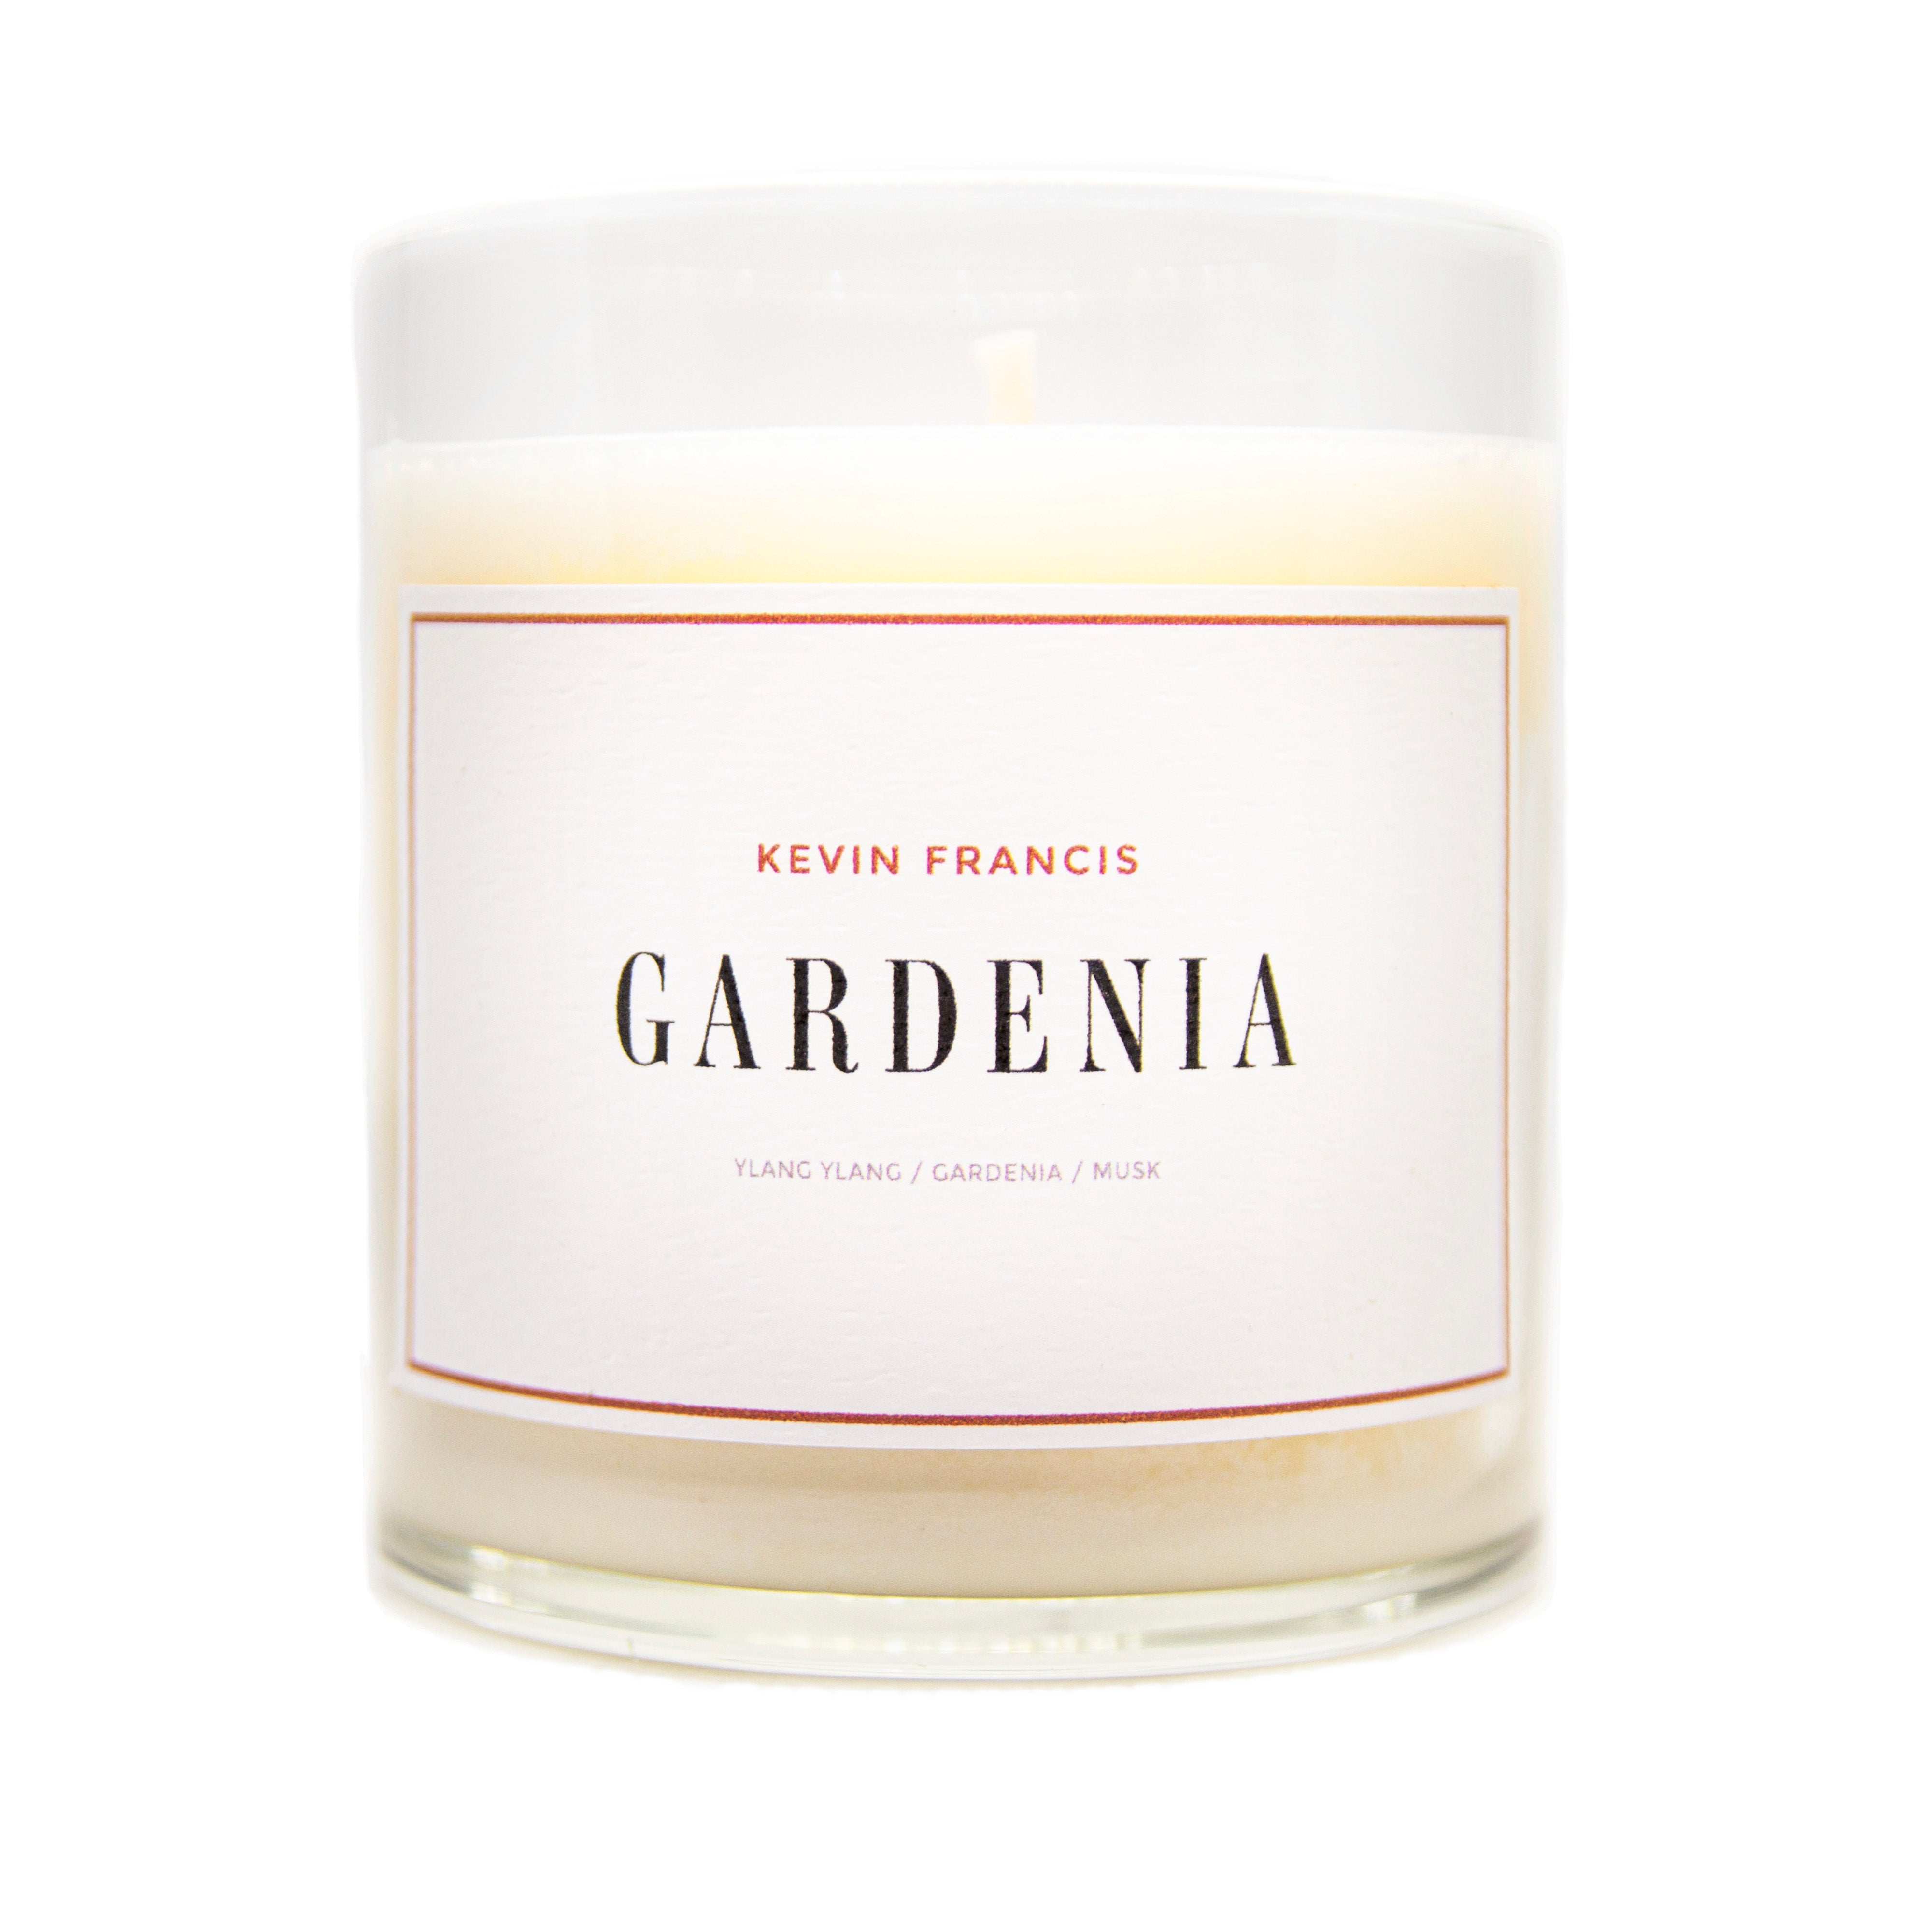 Gardenia Scented Luxury Candle by Kevin Francis Design | Luxury Home Decor